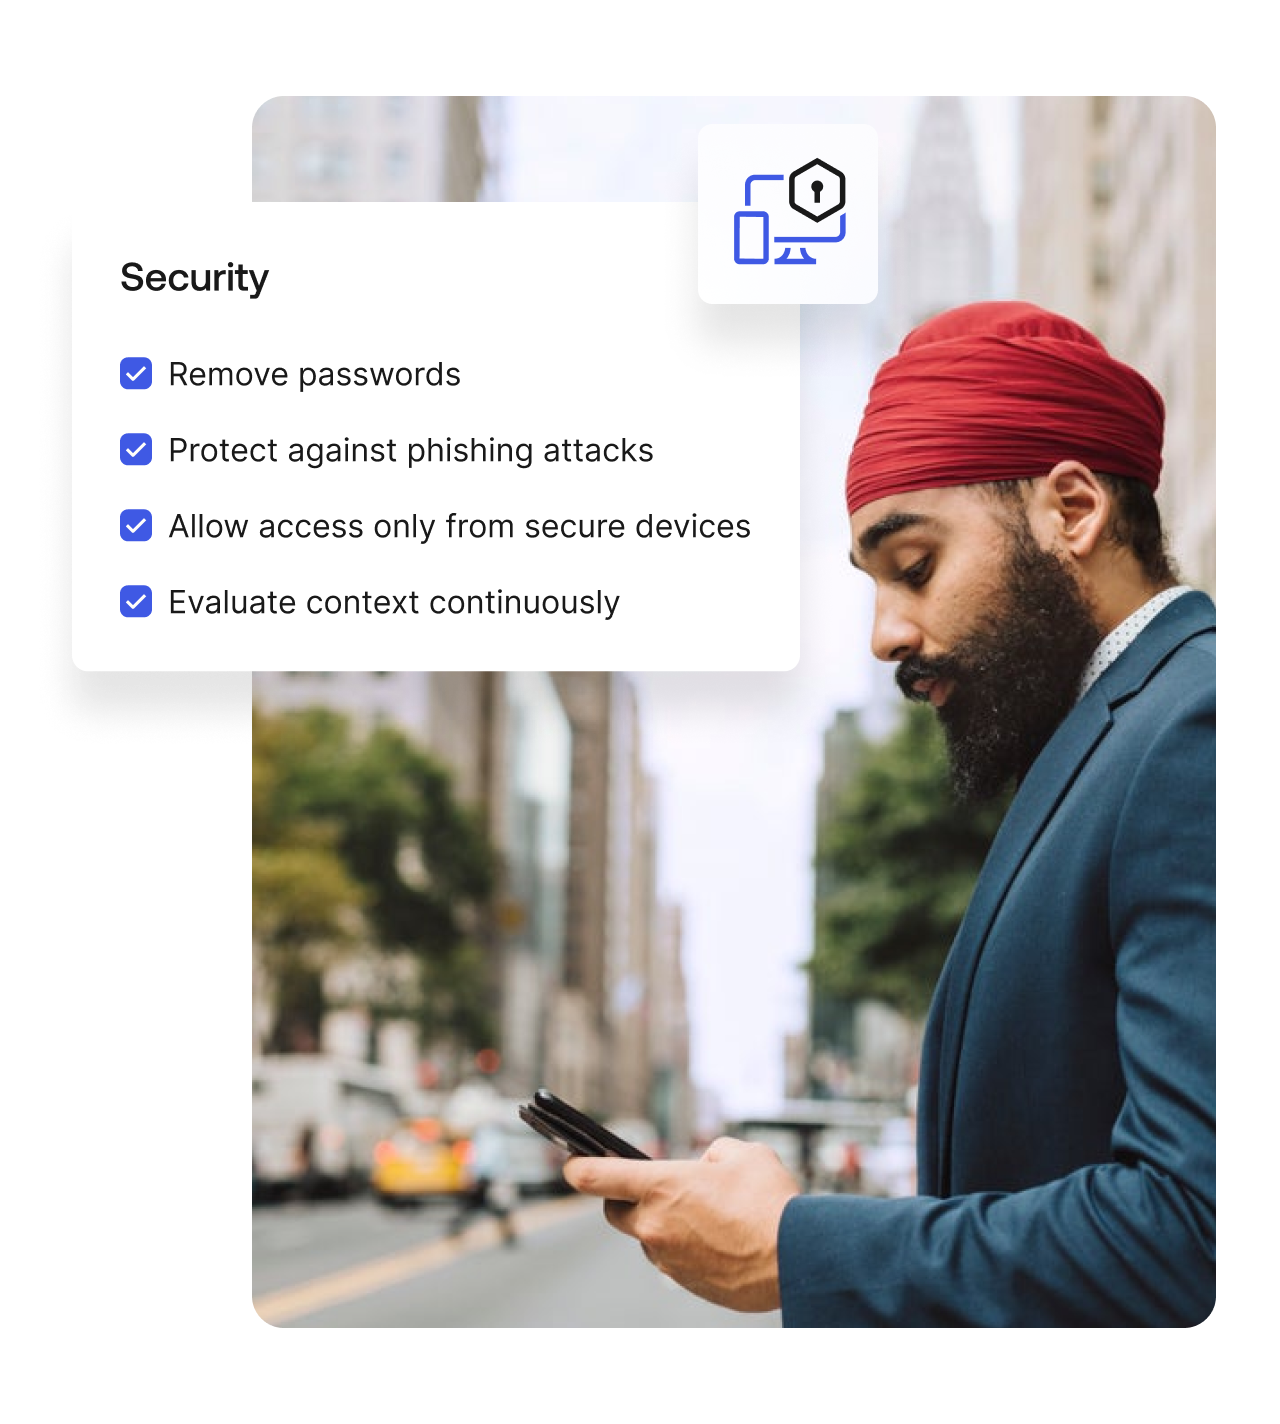 Display of Okta security features overlapping an image of a man on his phone. 